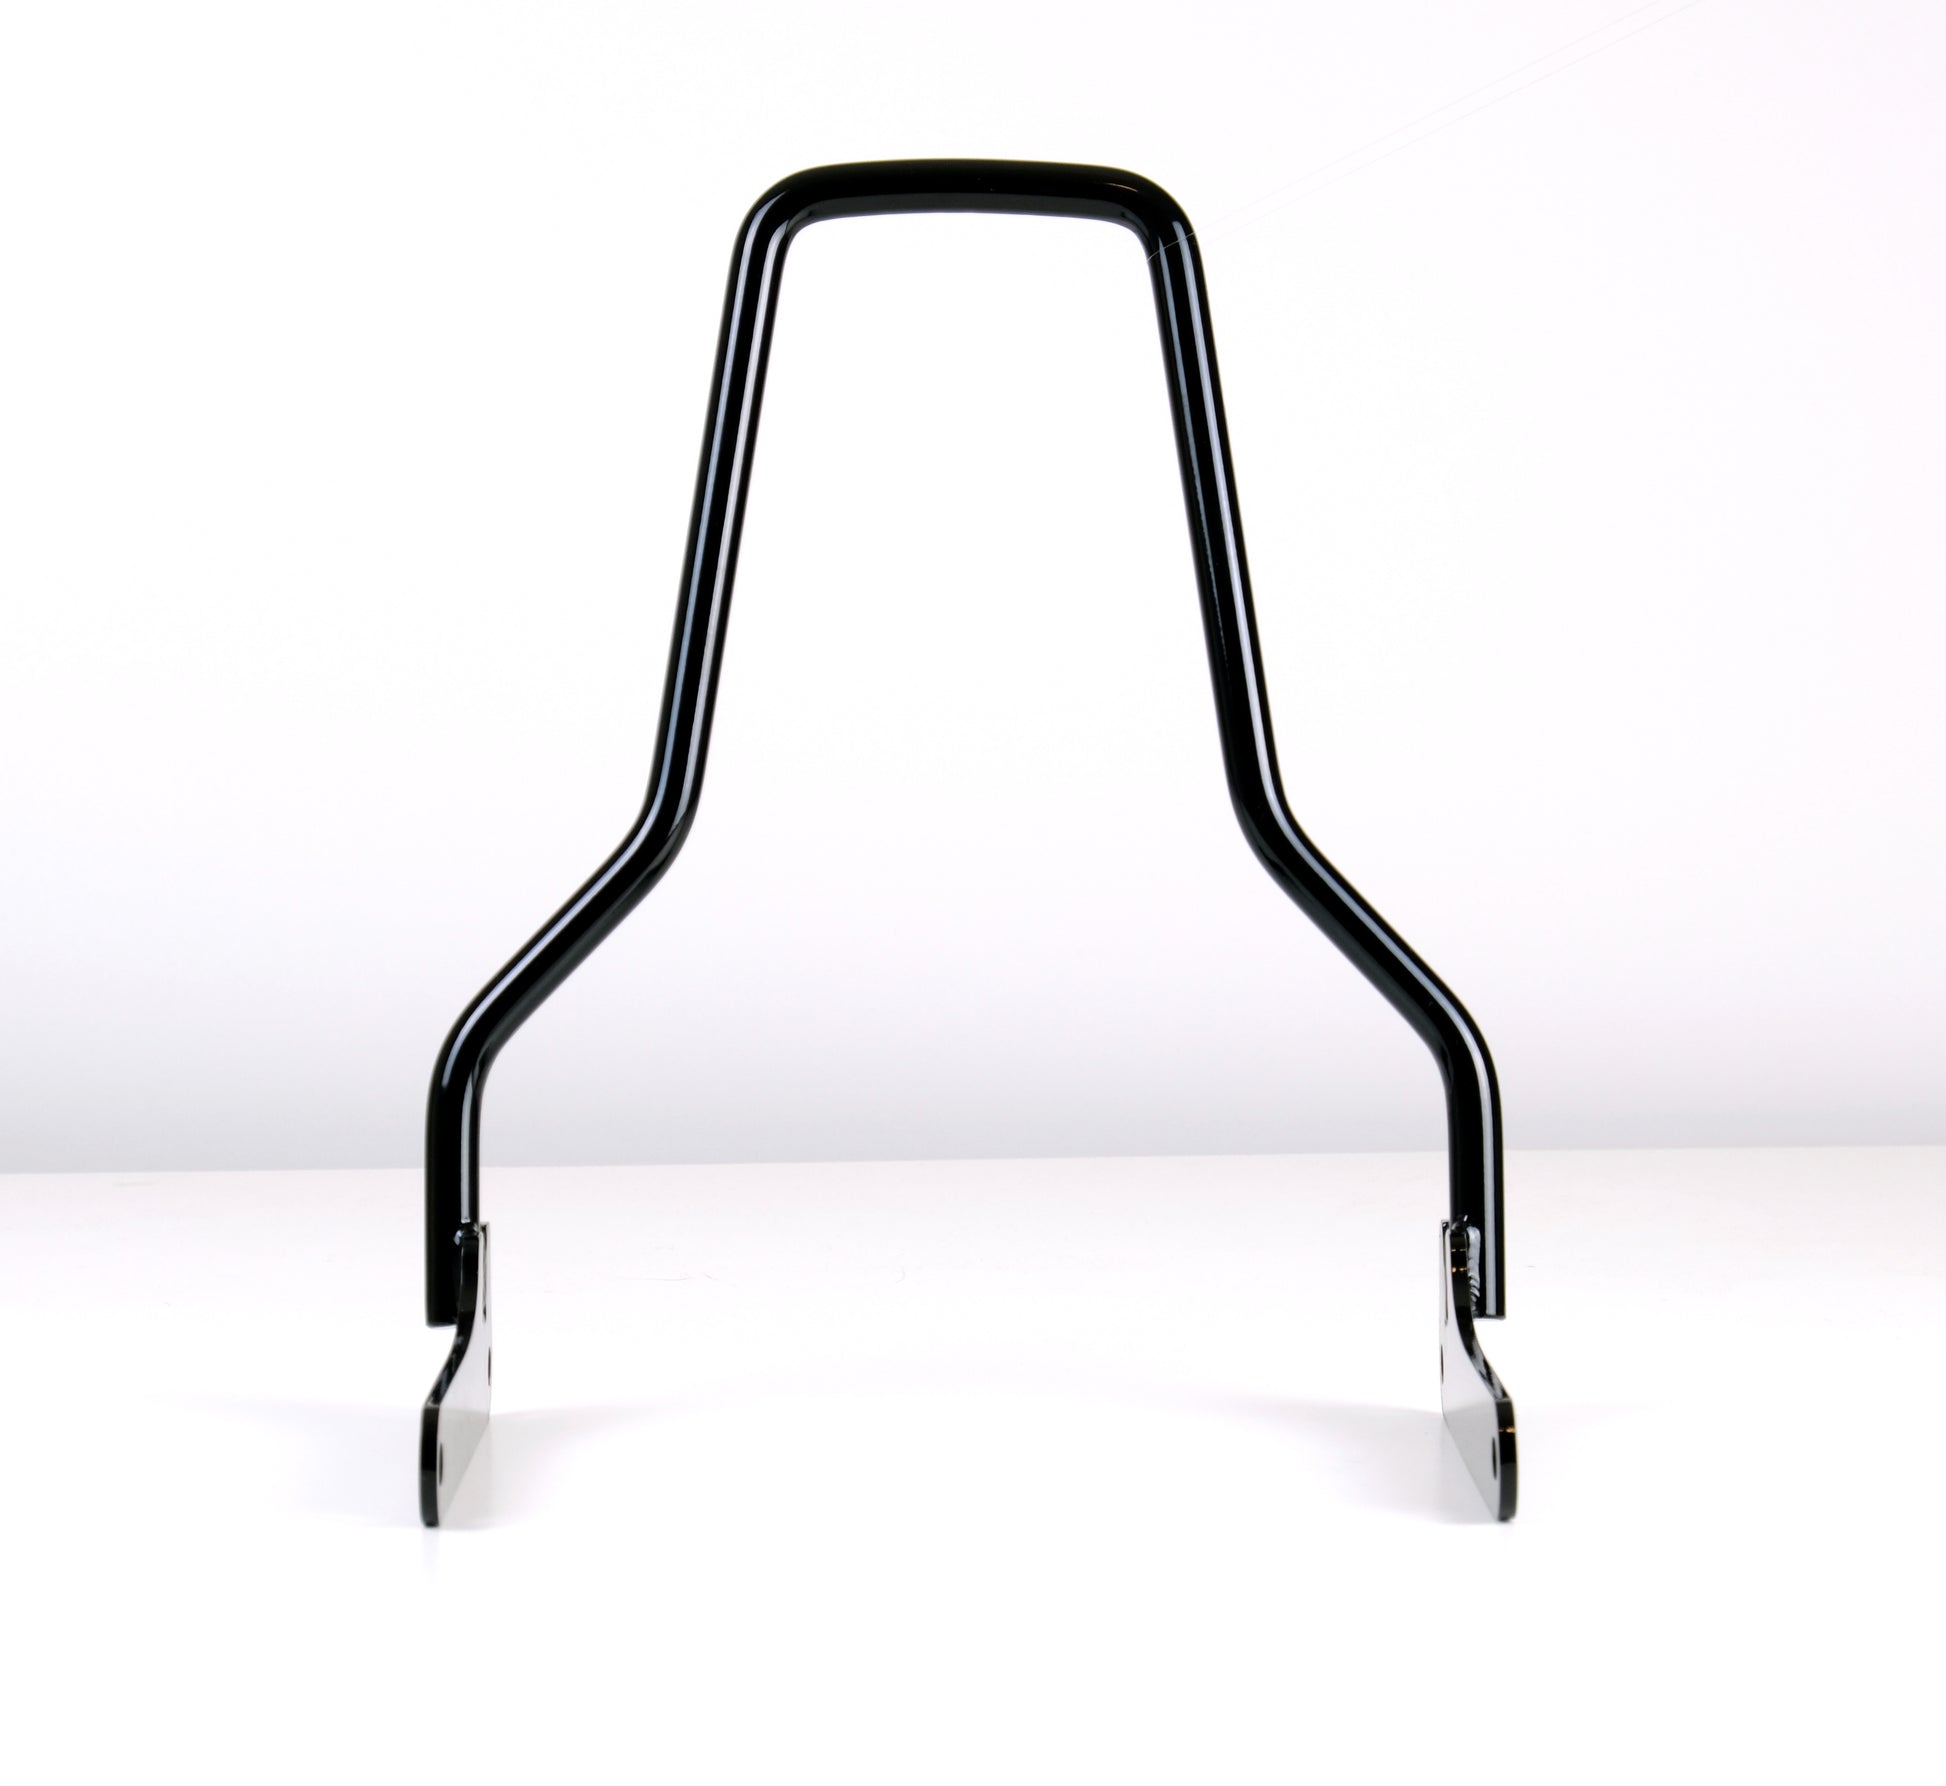 short low rider custom sissy bar by edward richie front view